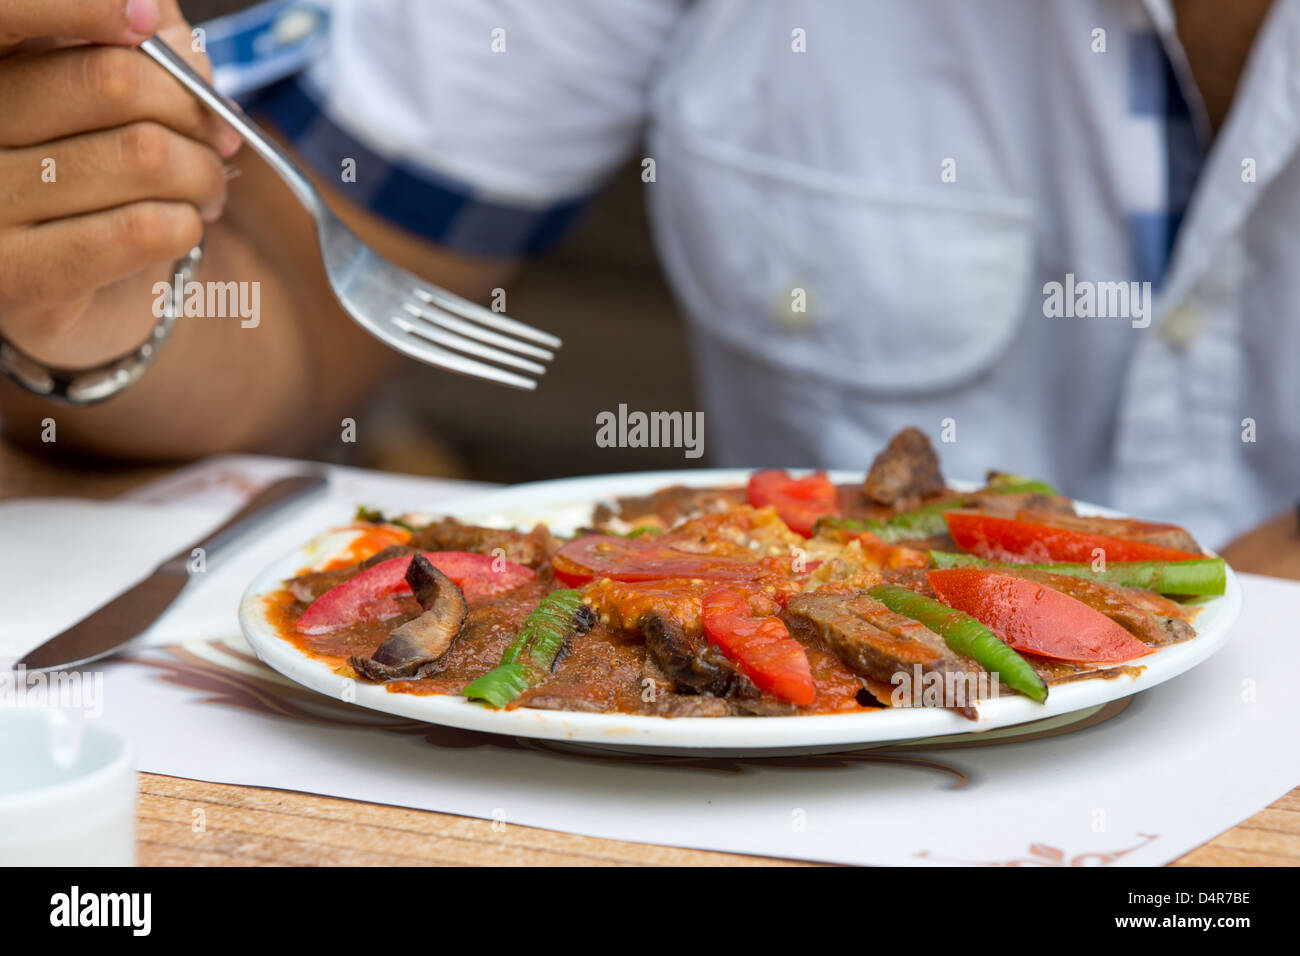 Getting ready to eat Turkish Iskender Doner, garnished with beef stripes, sliced tomatoes and peppers. Stock Photo